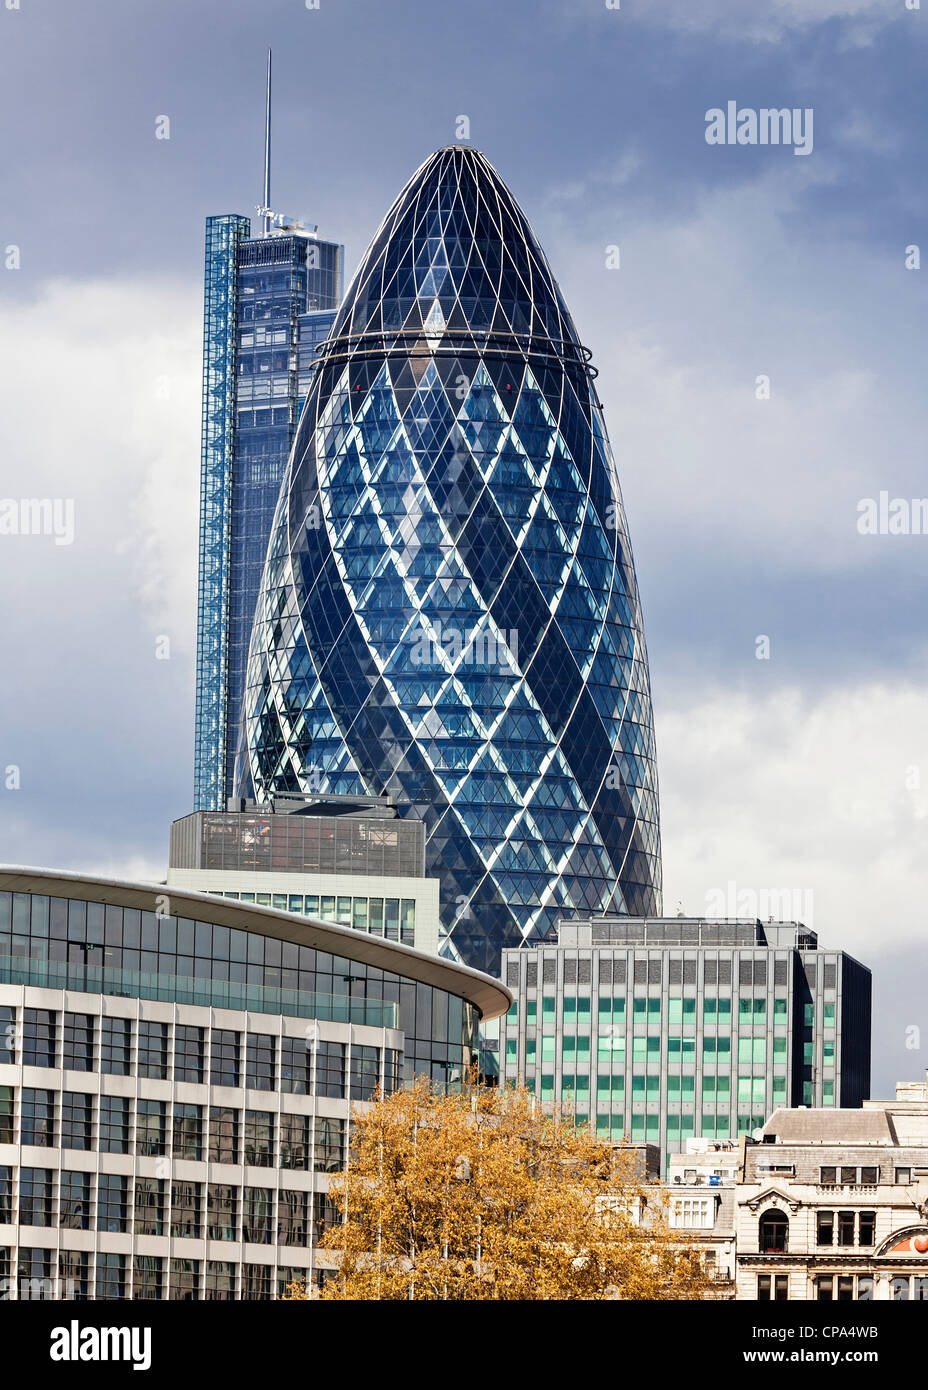 London skyline with 30 St Mary Axe better known as the Gherkin, London, England. Stock Photo